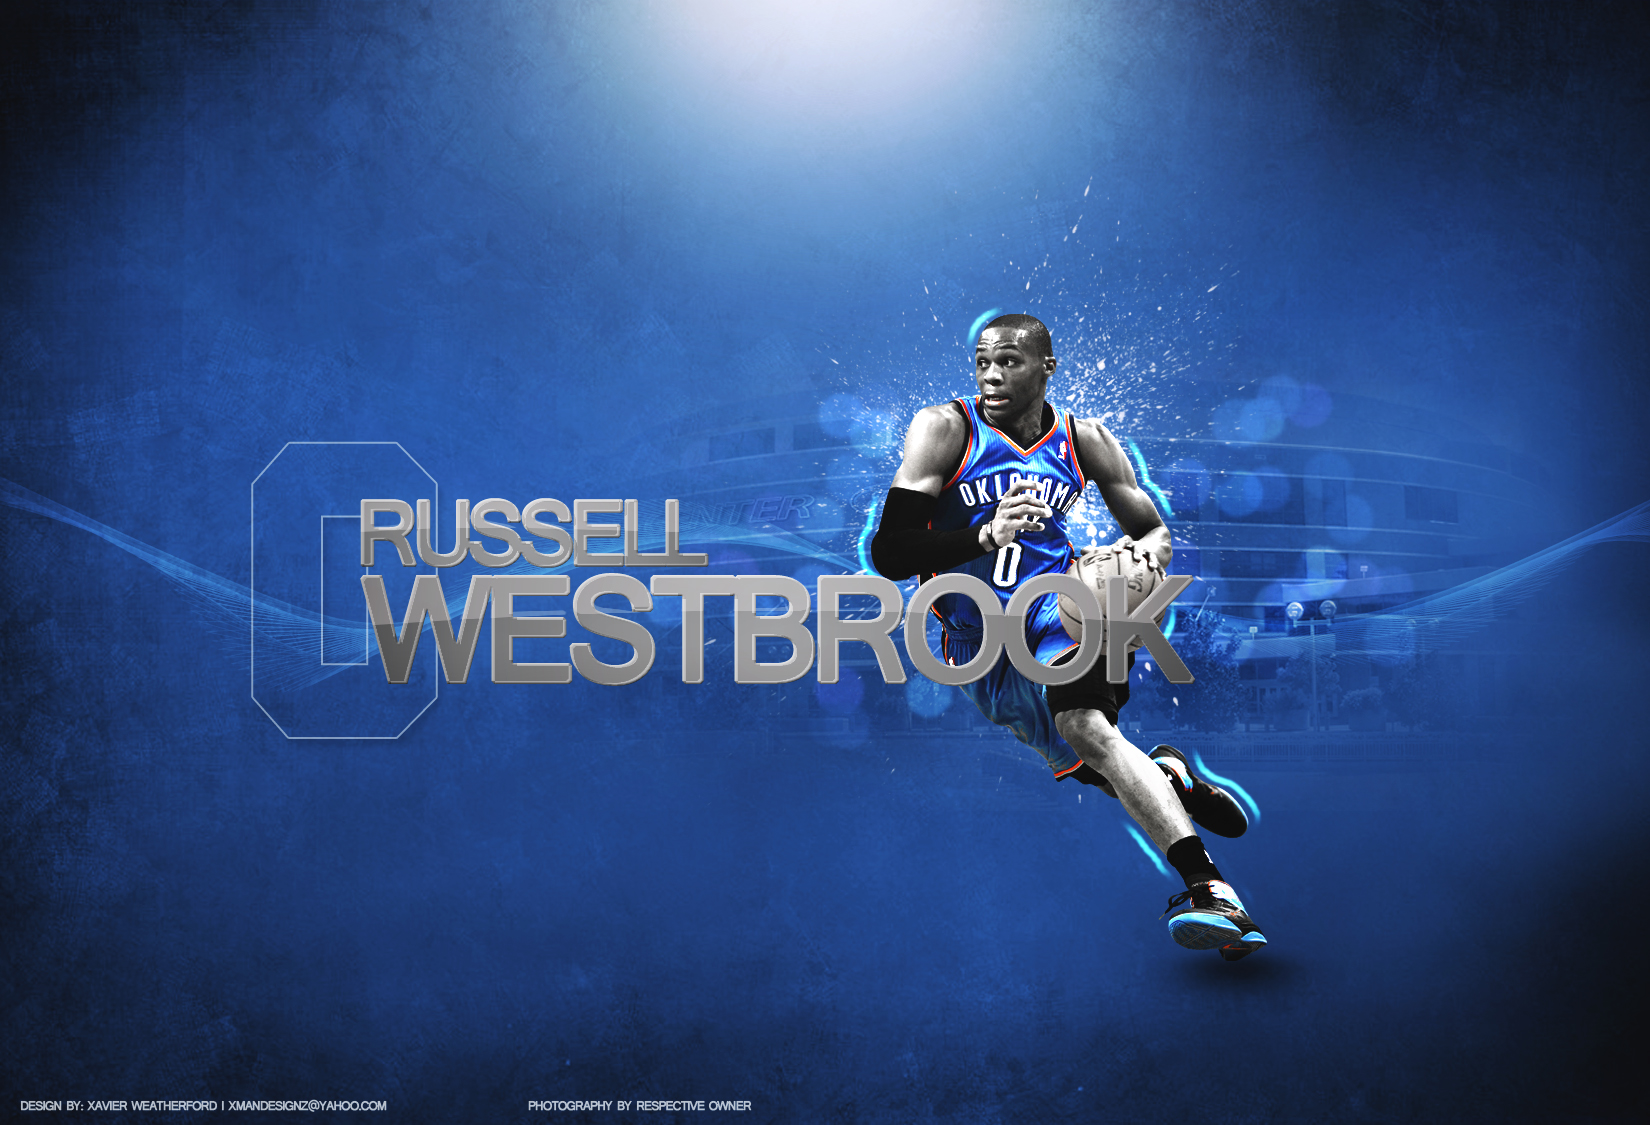 Download Oklahoma City Thunders Basketball Player Russell Westbrook  Wallpaper